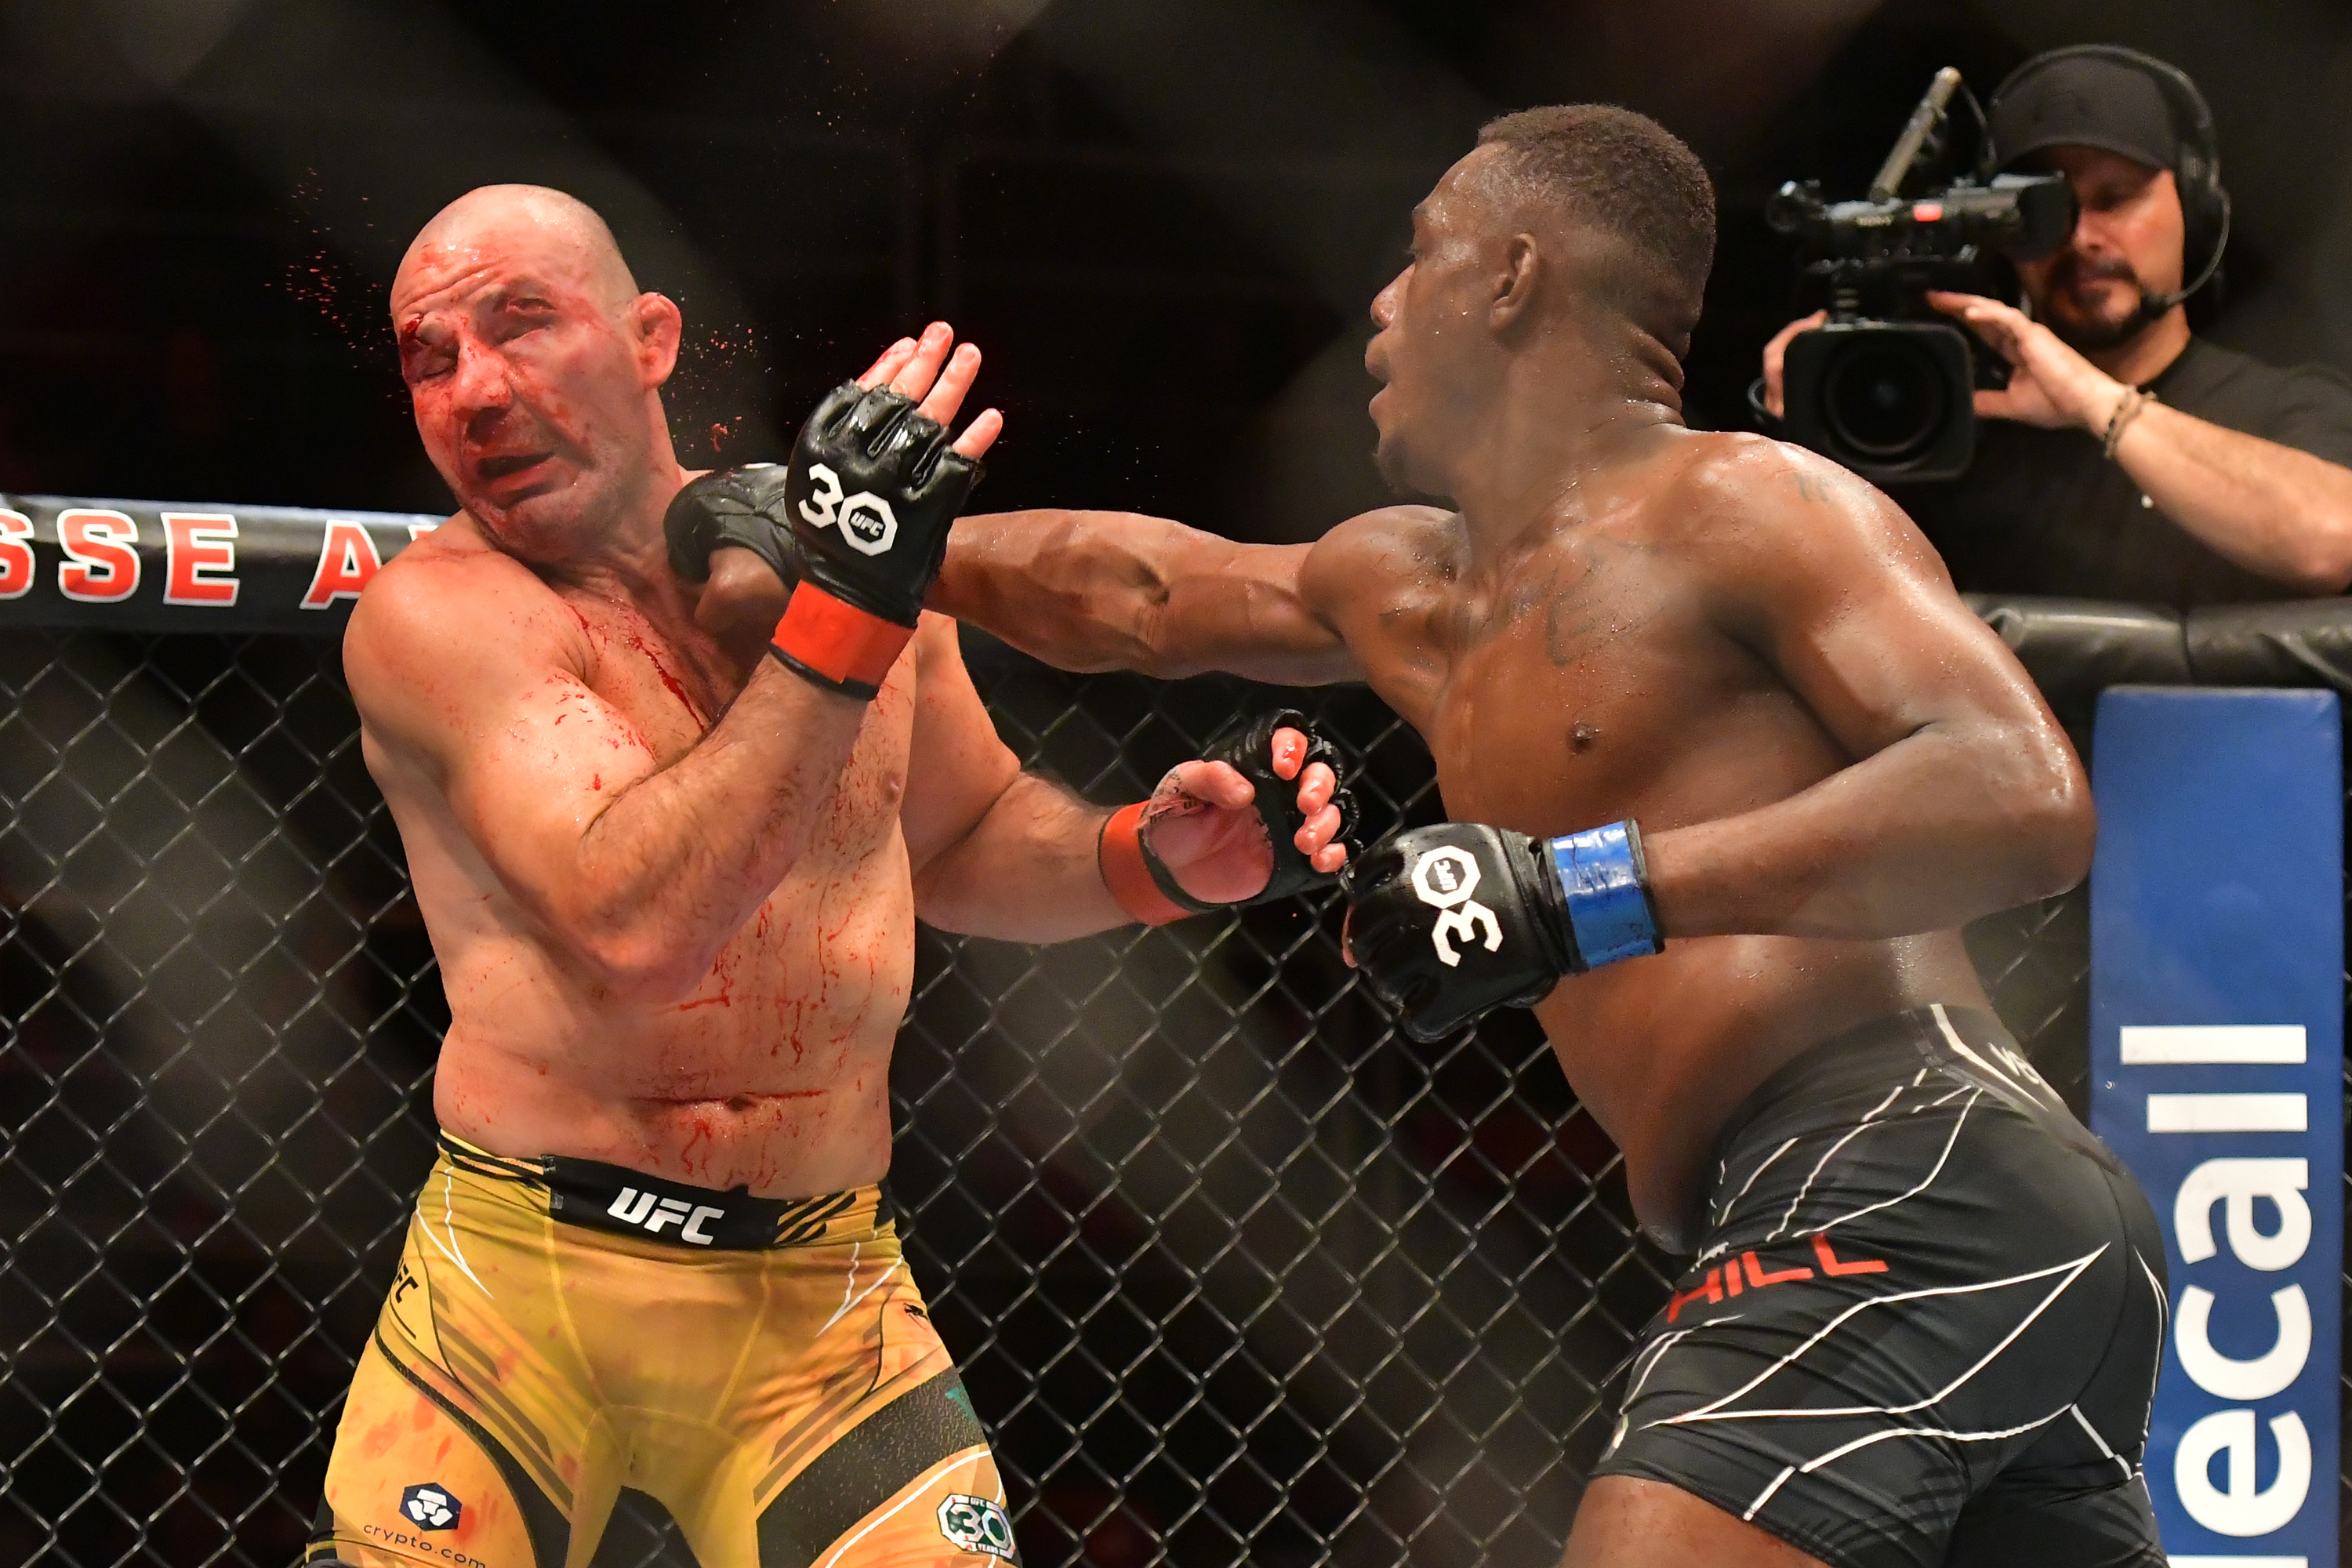 Glover Teixeira eats a right hand from Jamahal Hill in the main event of UFC 283.